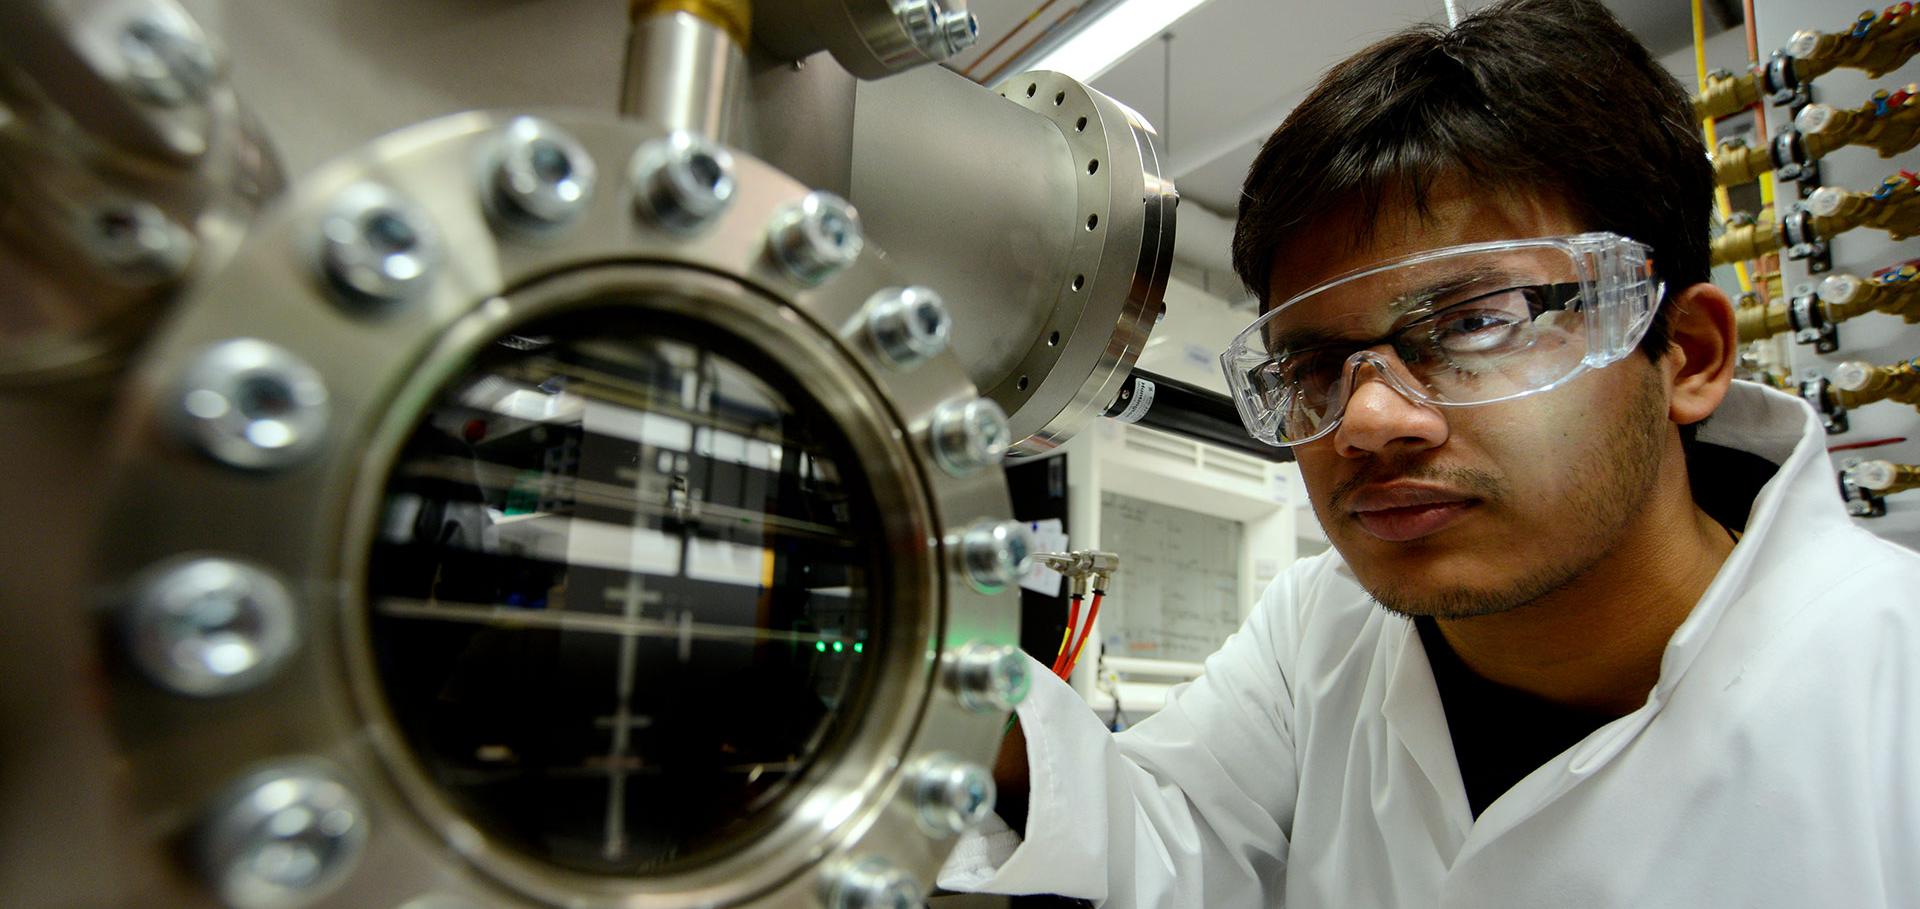 Man in white lab coat with protective eyewear working with scientific instrument.